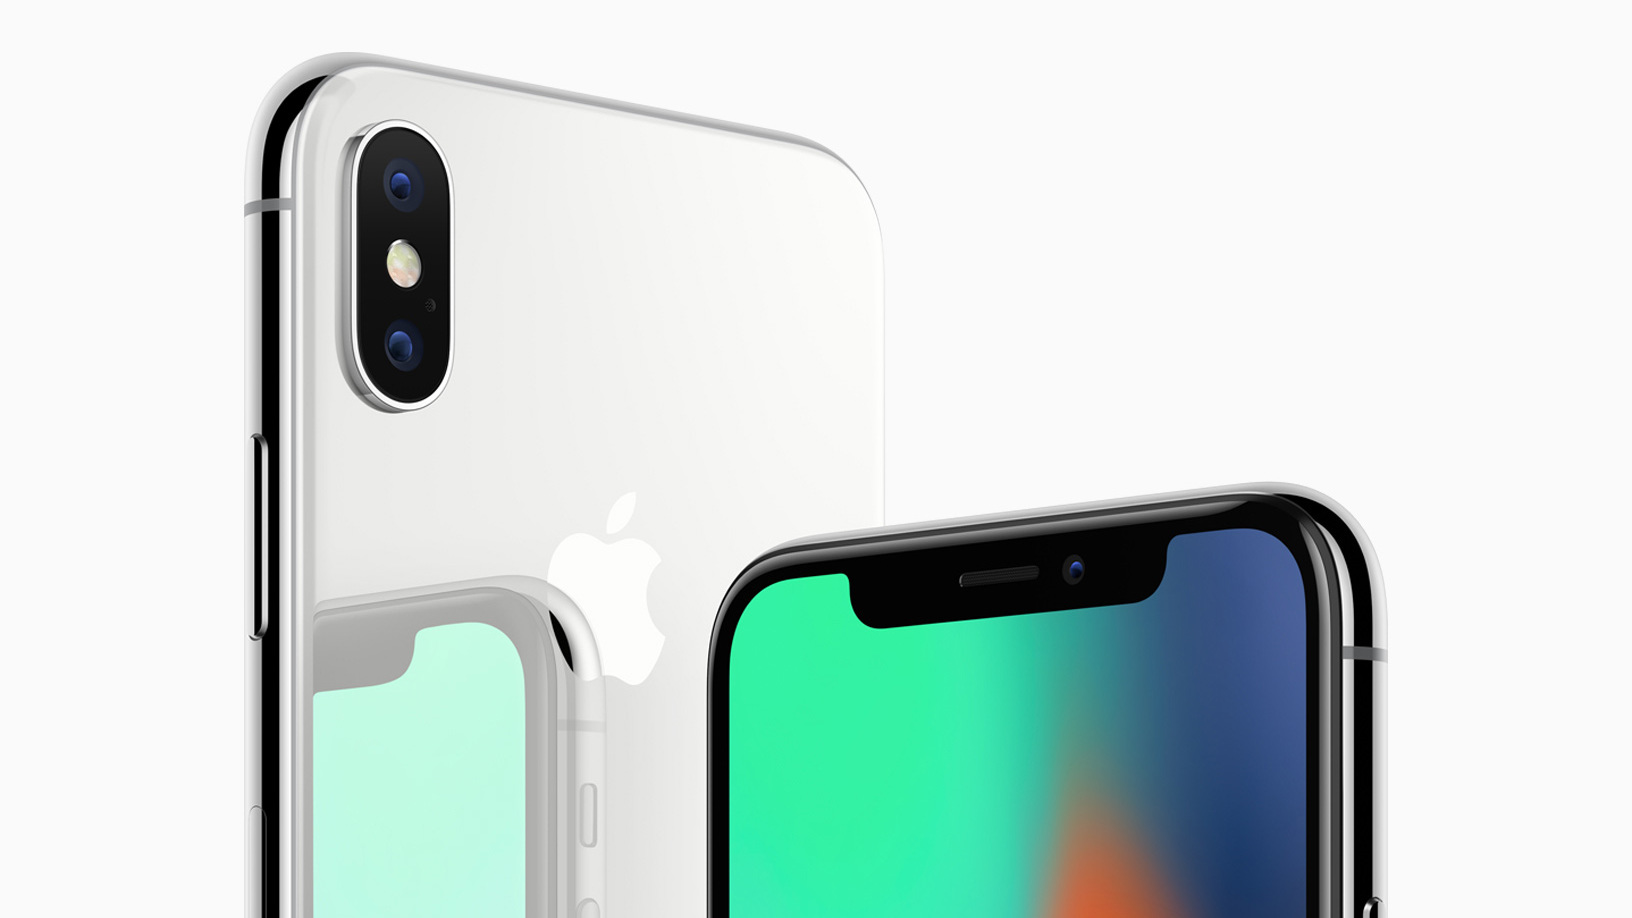 Apple Reportedly Made Face ID Less Accurate To Speed Up iPhone X Production